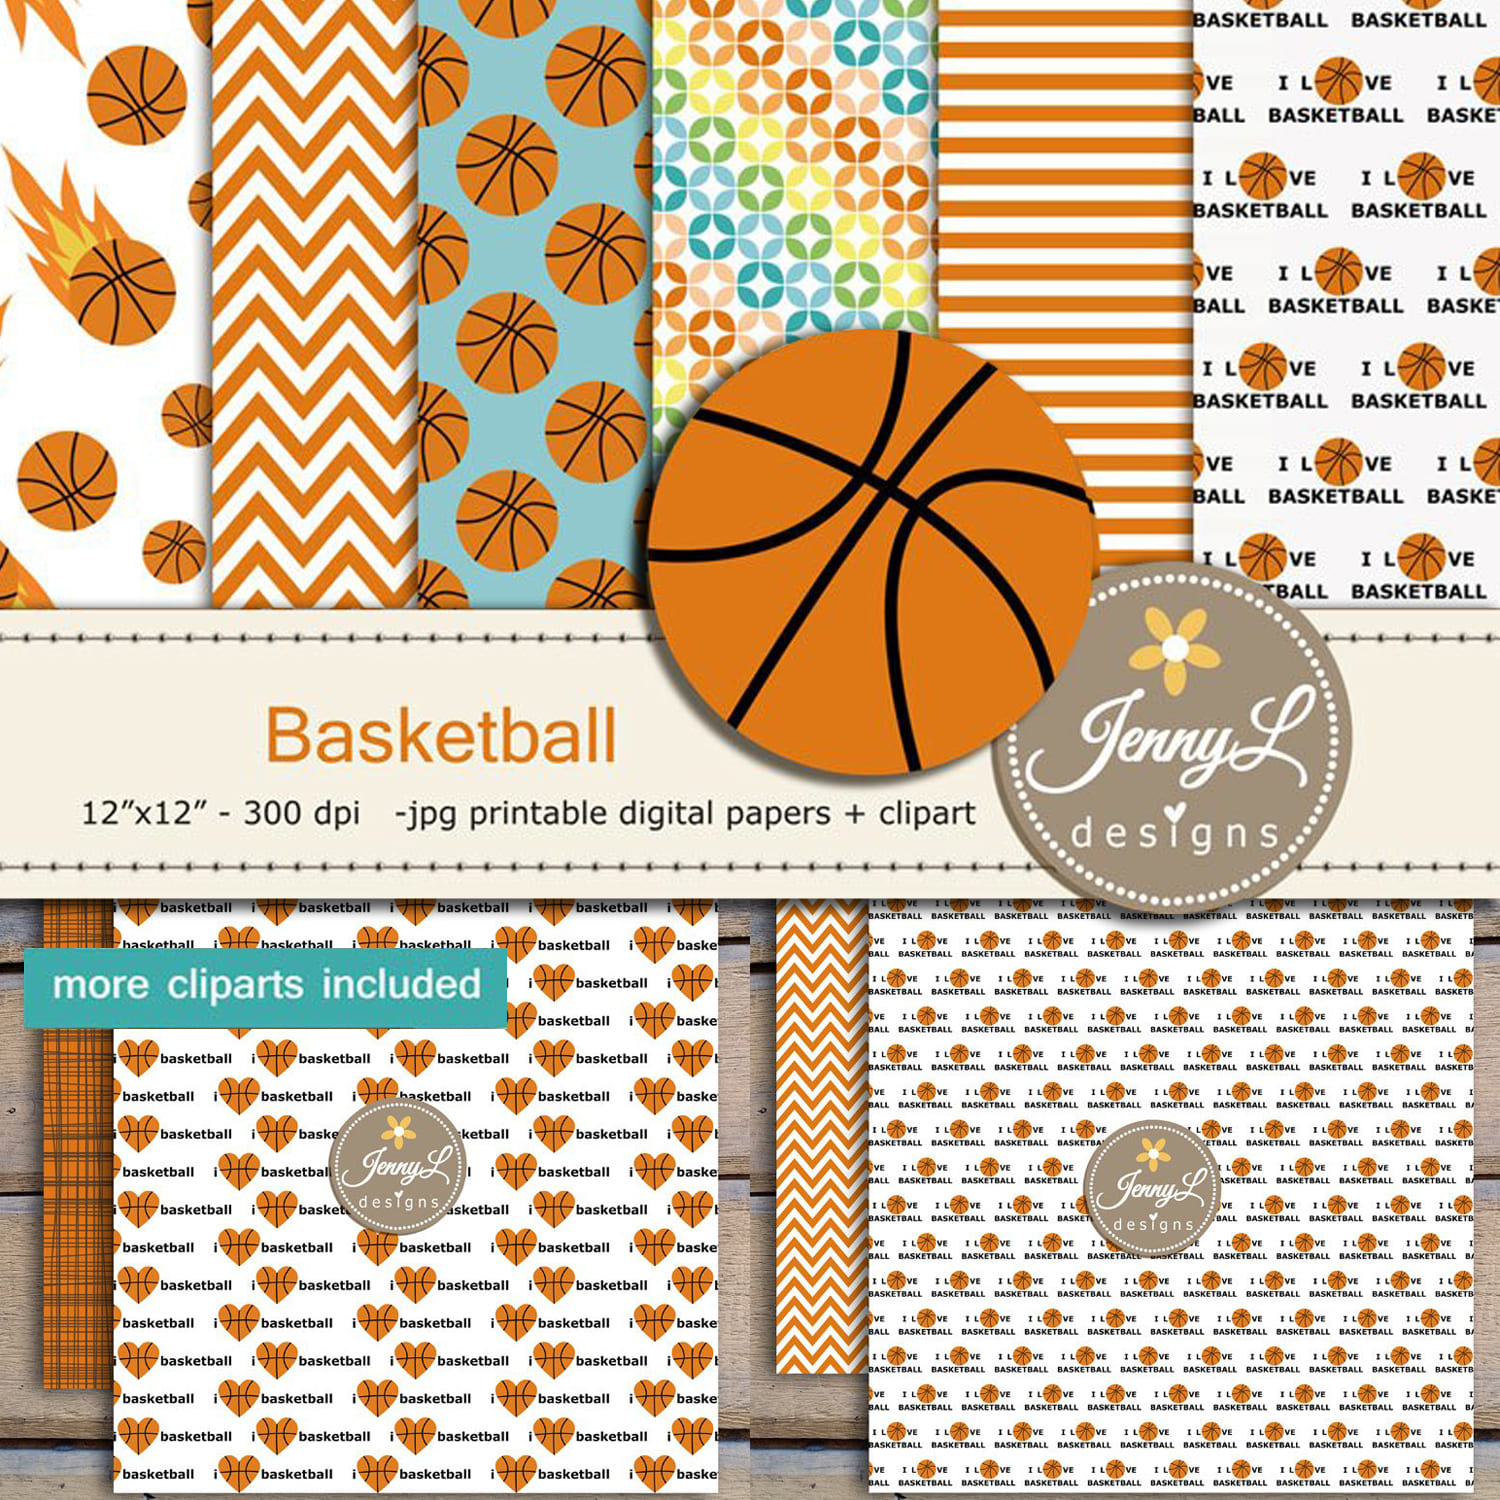 Basketball digital papers and clipart set Created By JennyL Designs.